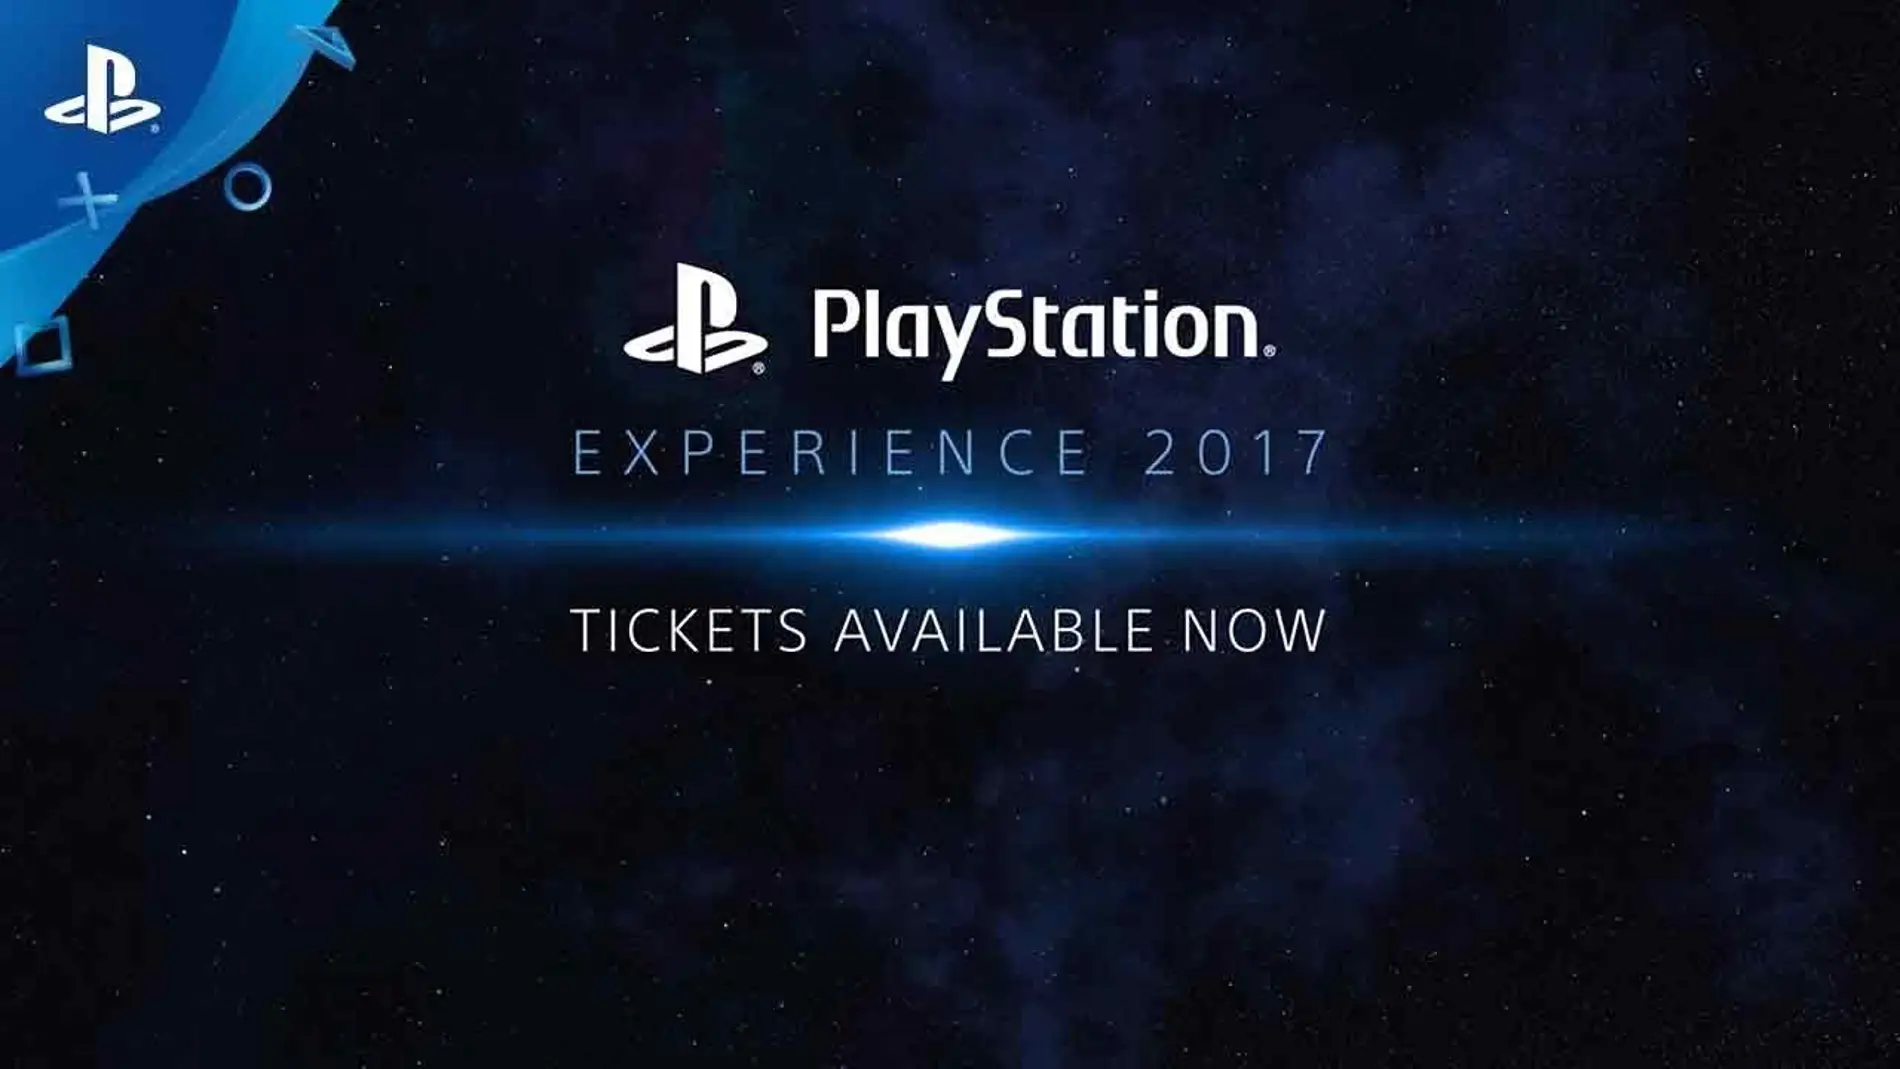 PlayStation Experience